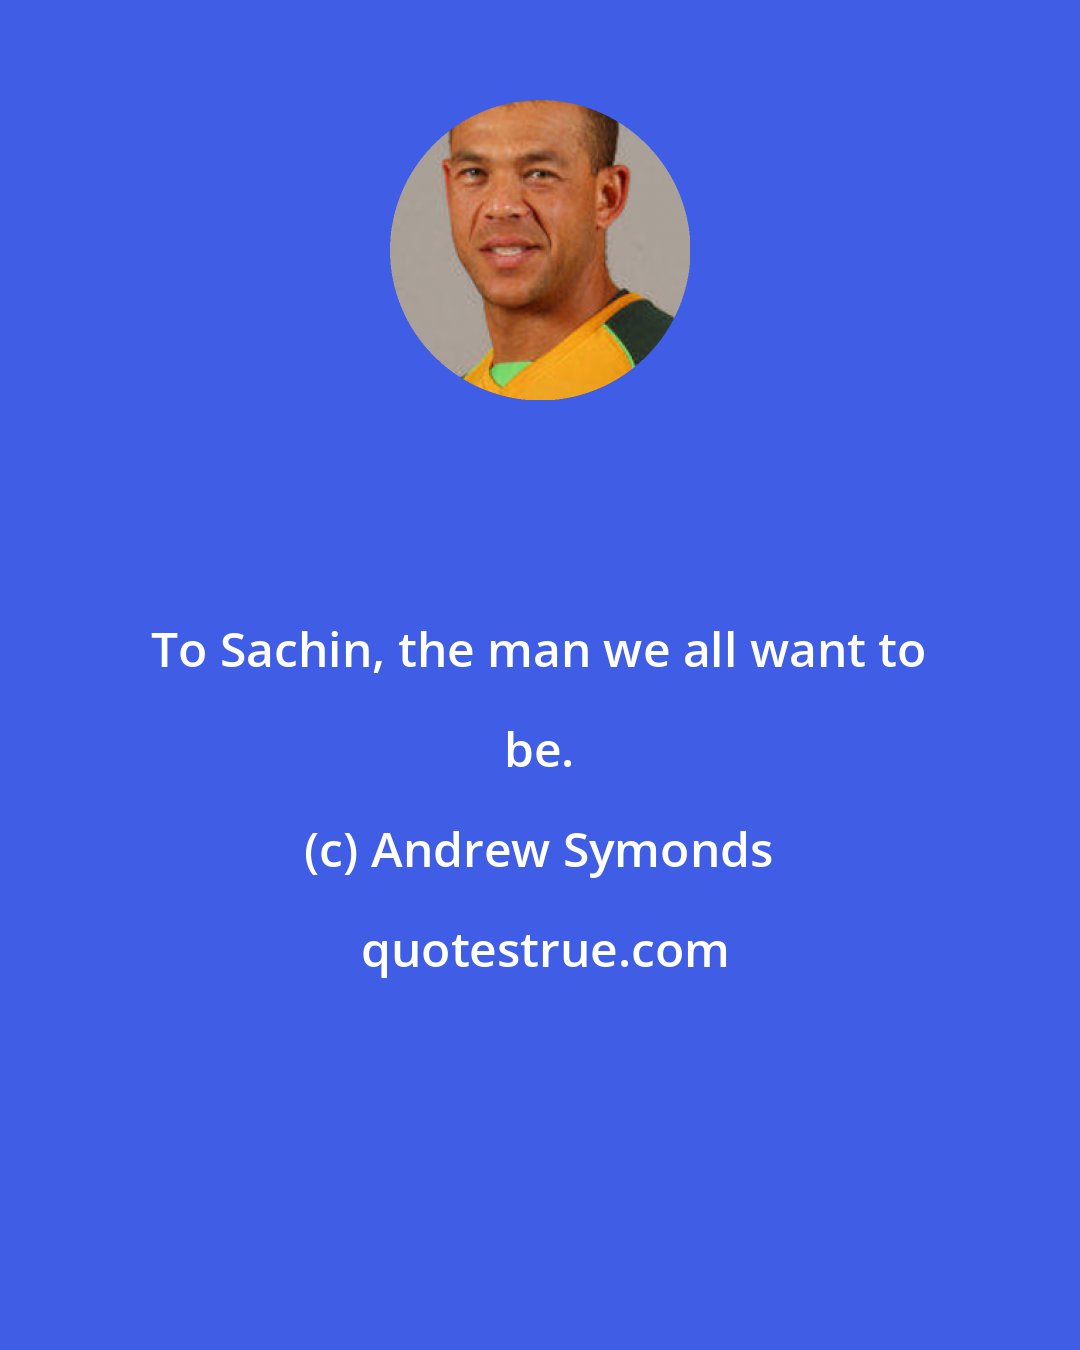 Andrew Symonds: To Sachin, the man we all want to be.